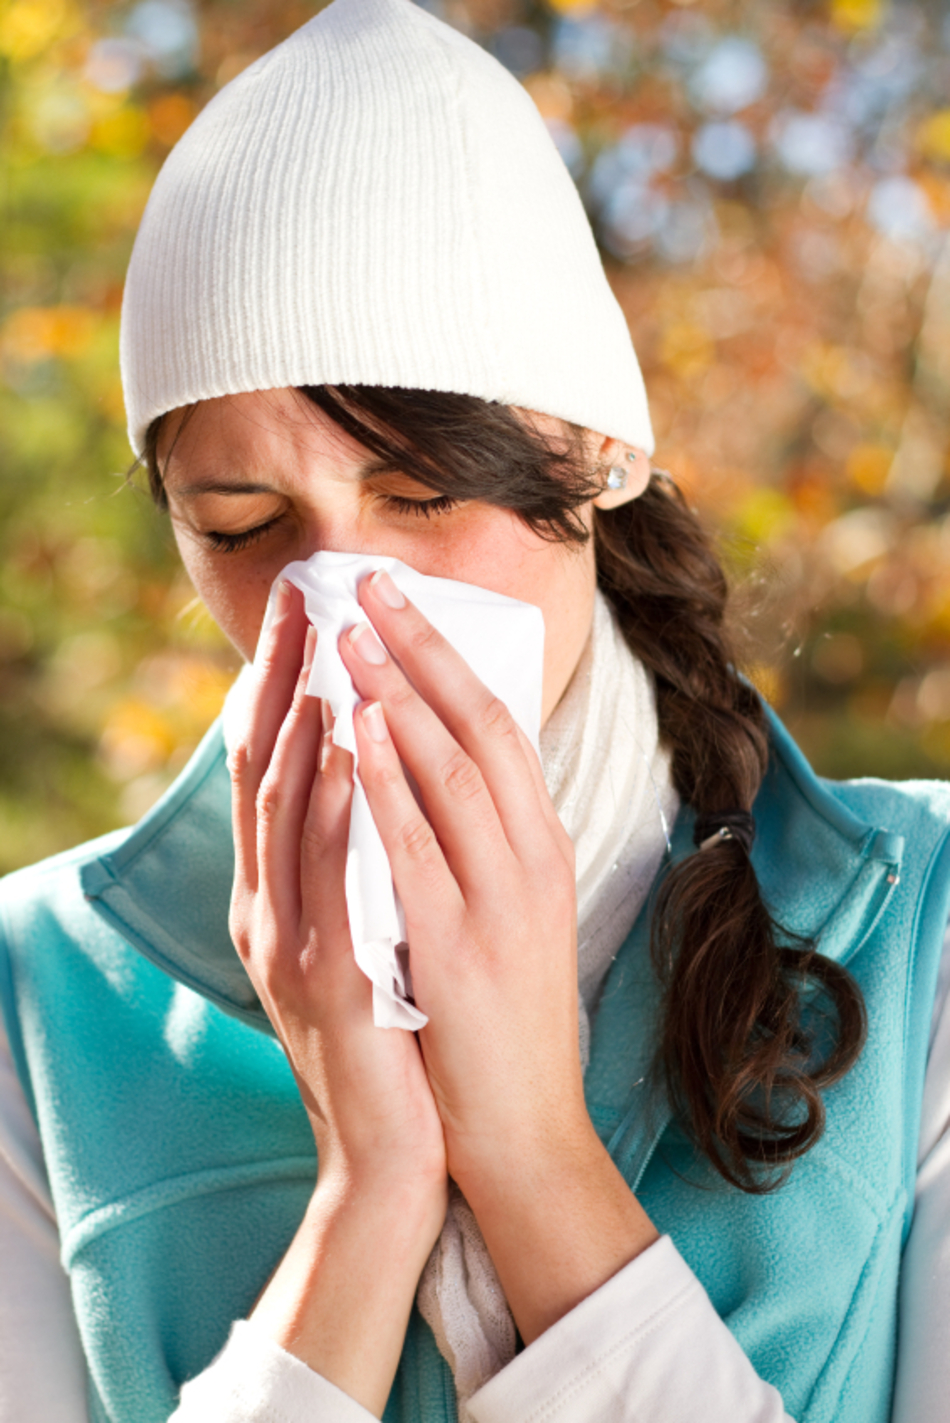 Coping with Fall Allergies